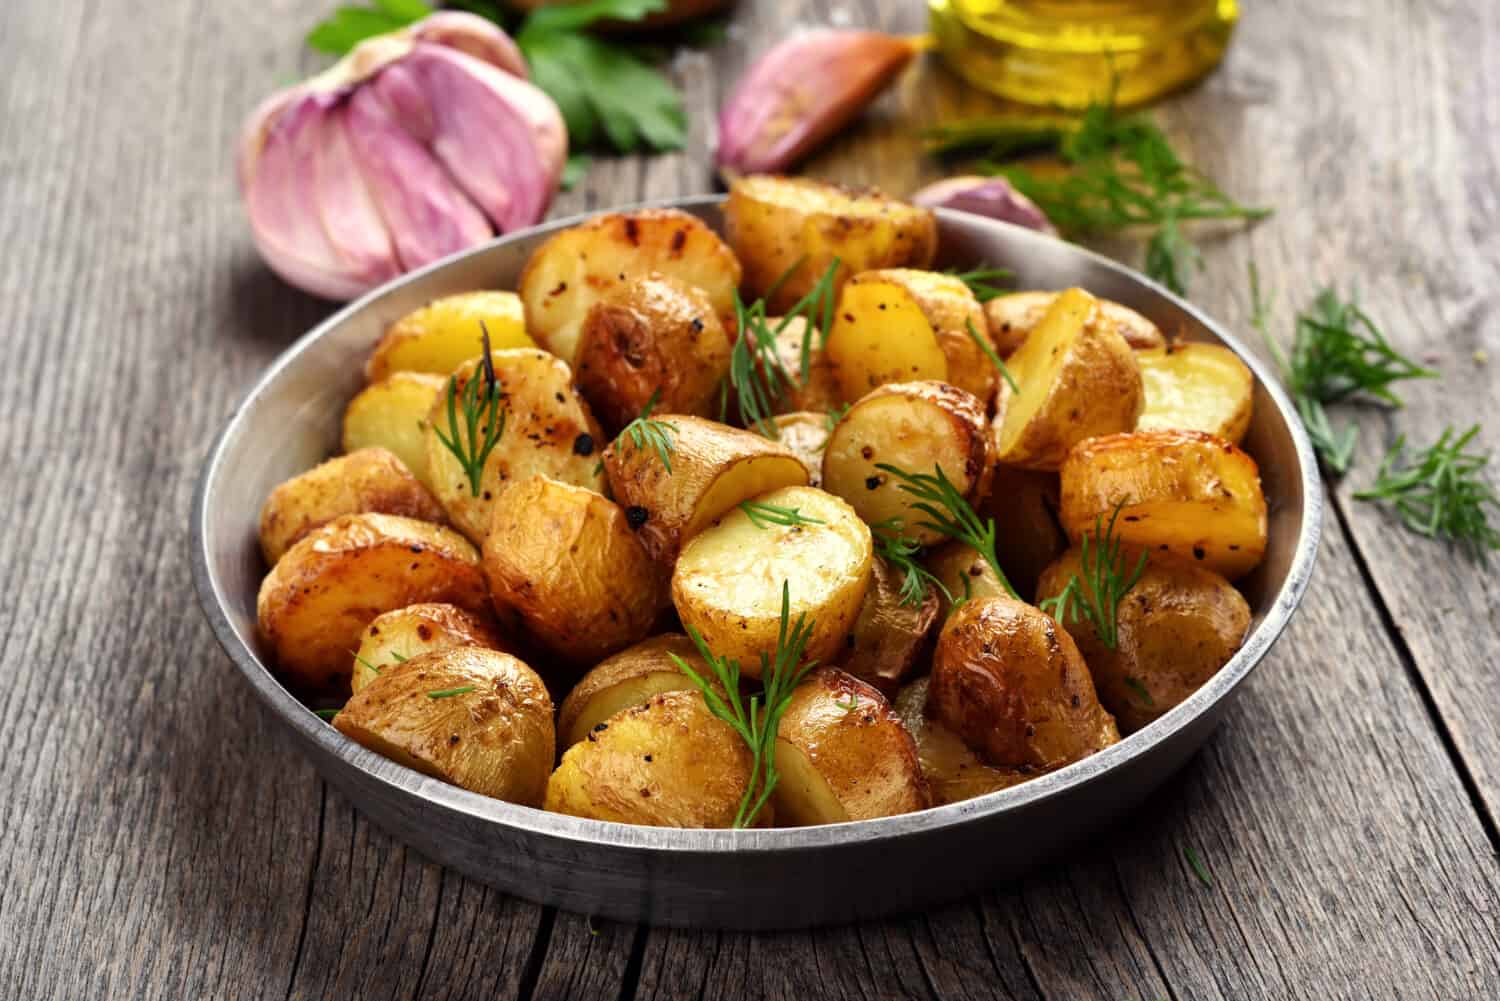 Roasted potato with dill on wooden background